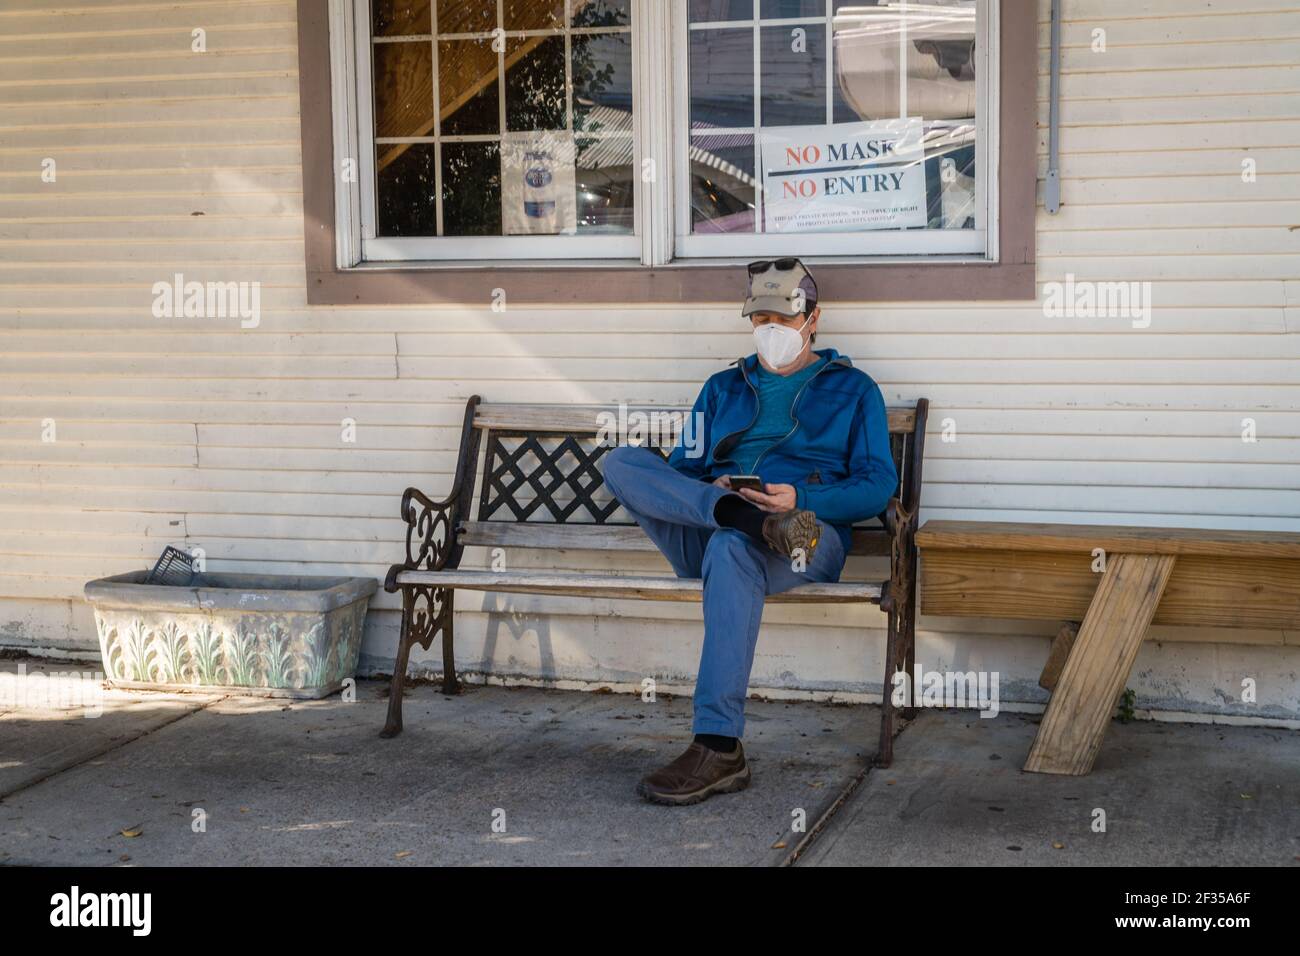 Man sitting on bench outside of restaurant wearing mask during the Covid-19 pandemic. Behind him is a sign reading 'no mask, no entry'. Stock Photo